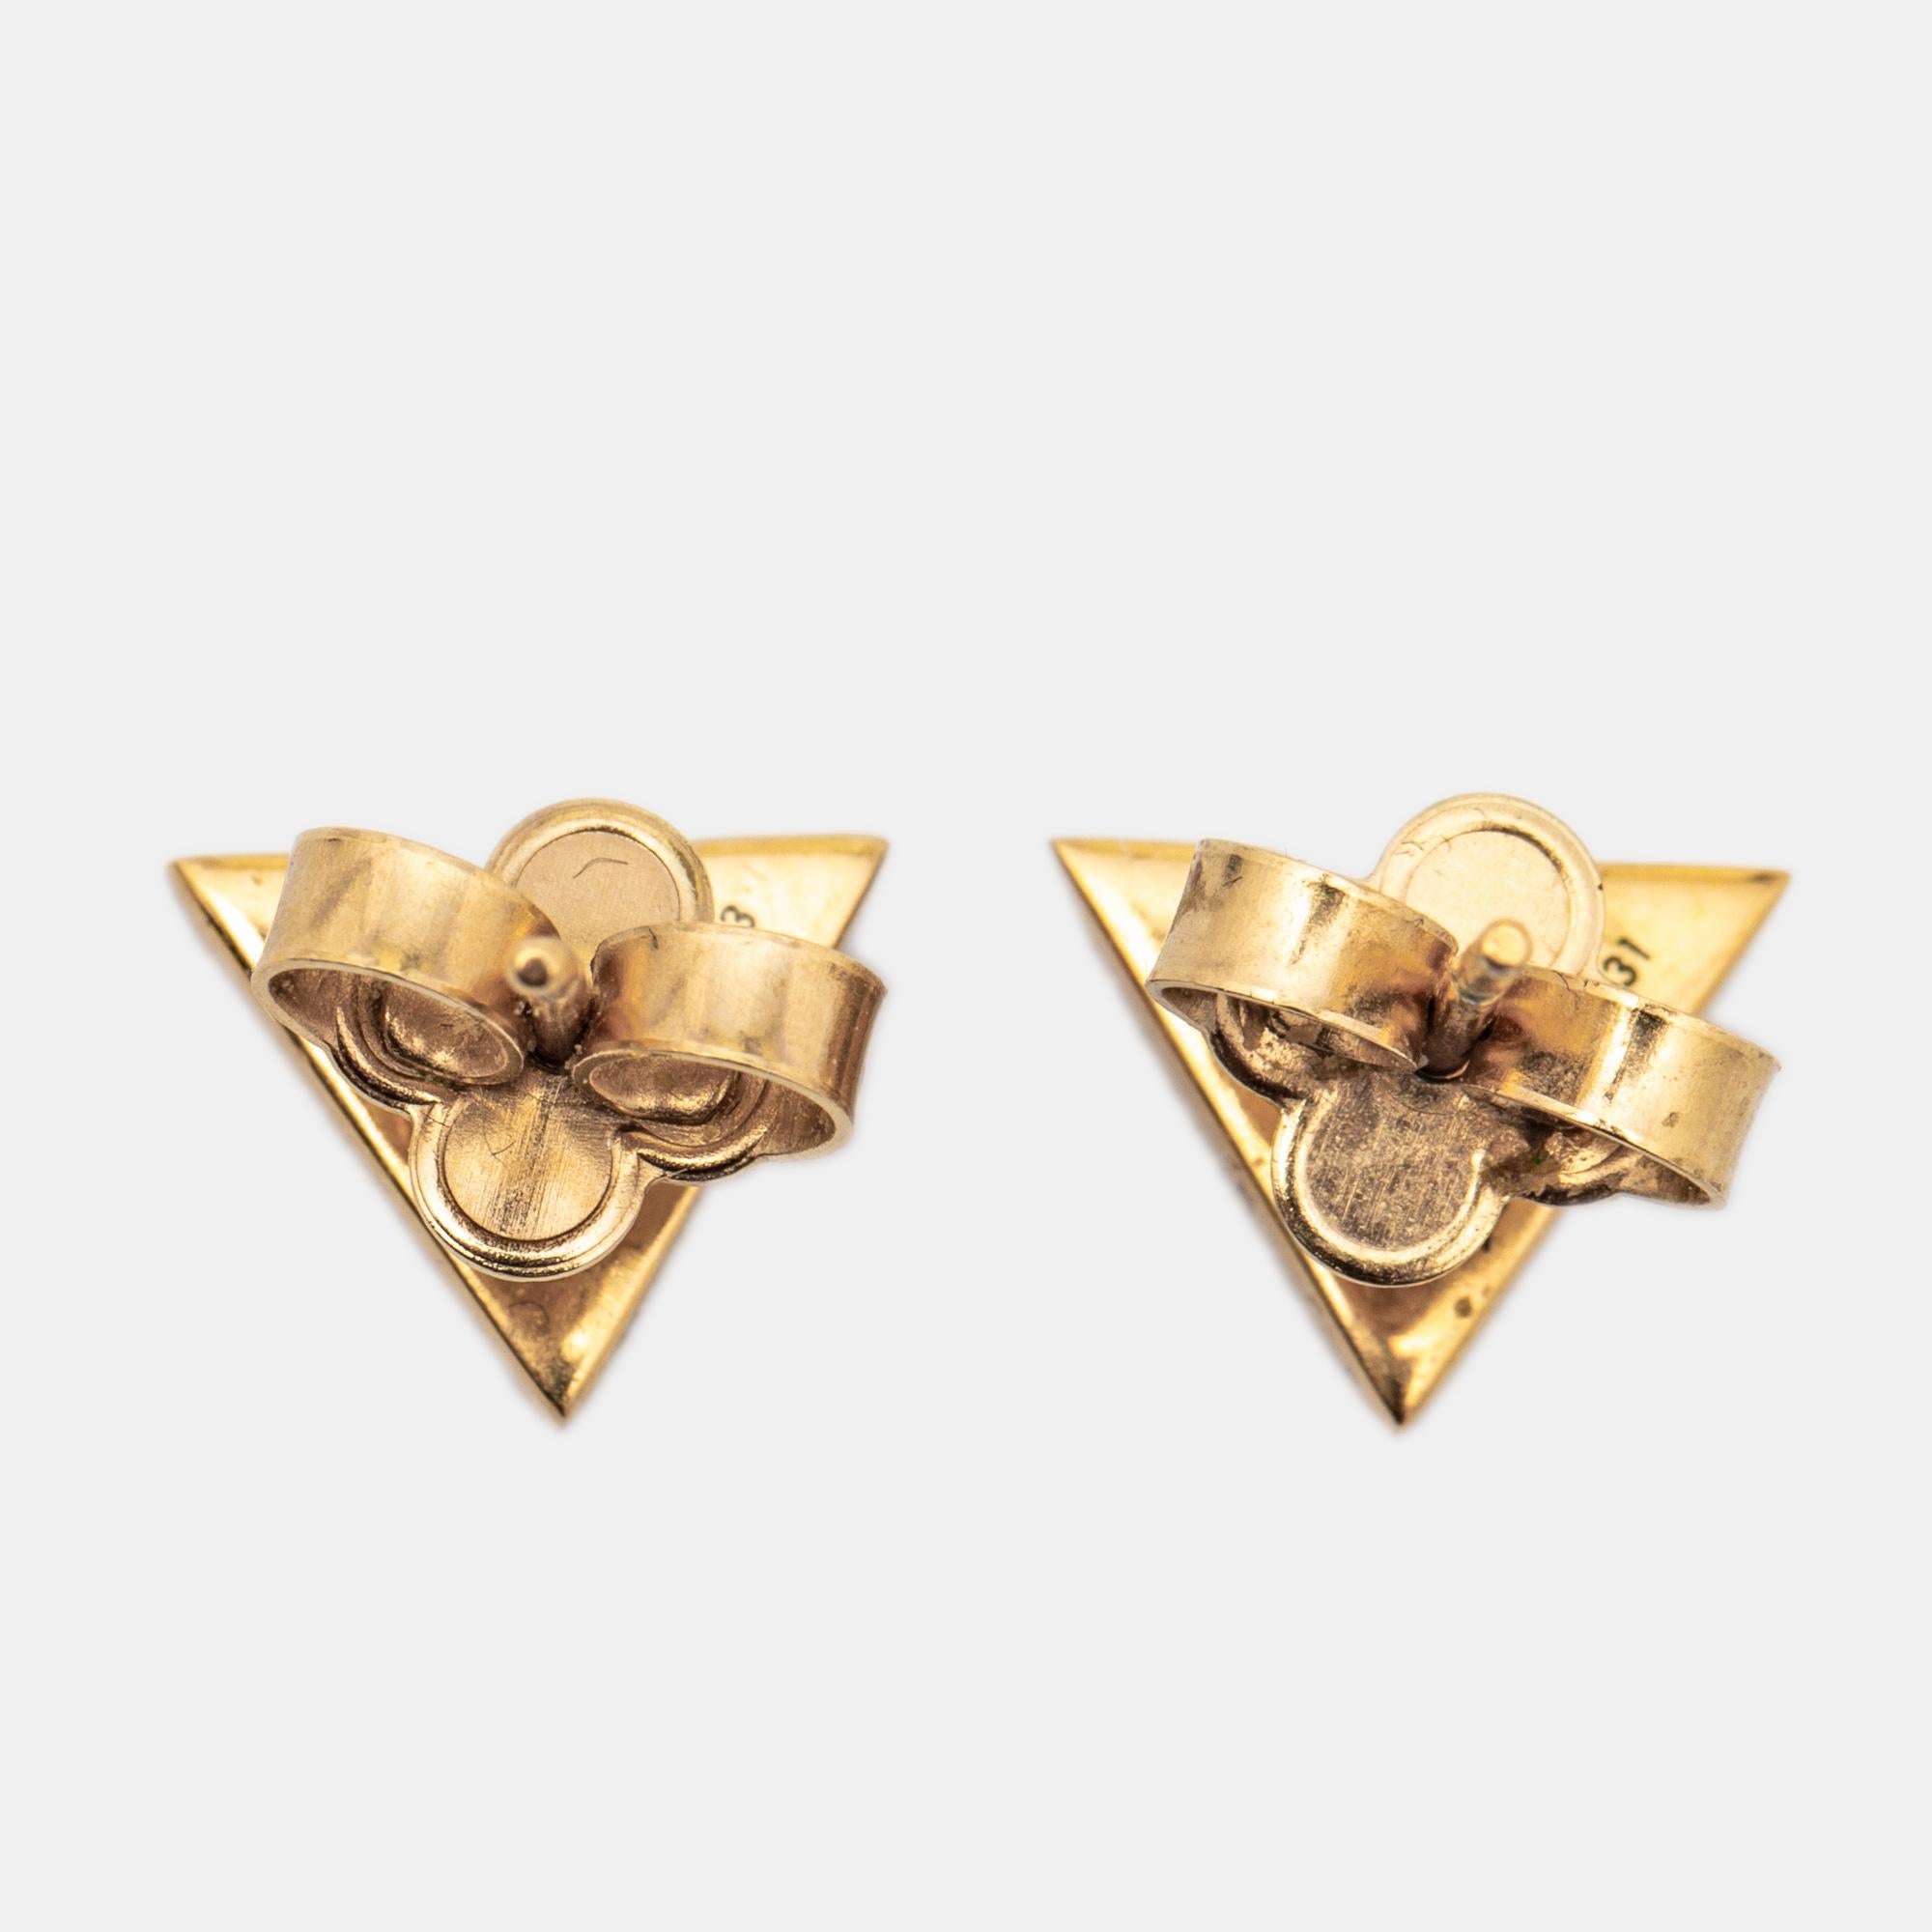 Delicately sculpted into fine creations, these stud earrings from Louis Vuitton are here to make you look beautiful. They are set in gold-tone metal and feature a V-shaped structure. Style them with your with formal outfits for a chic touch.

